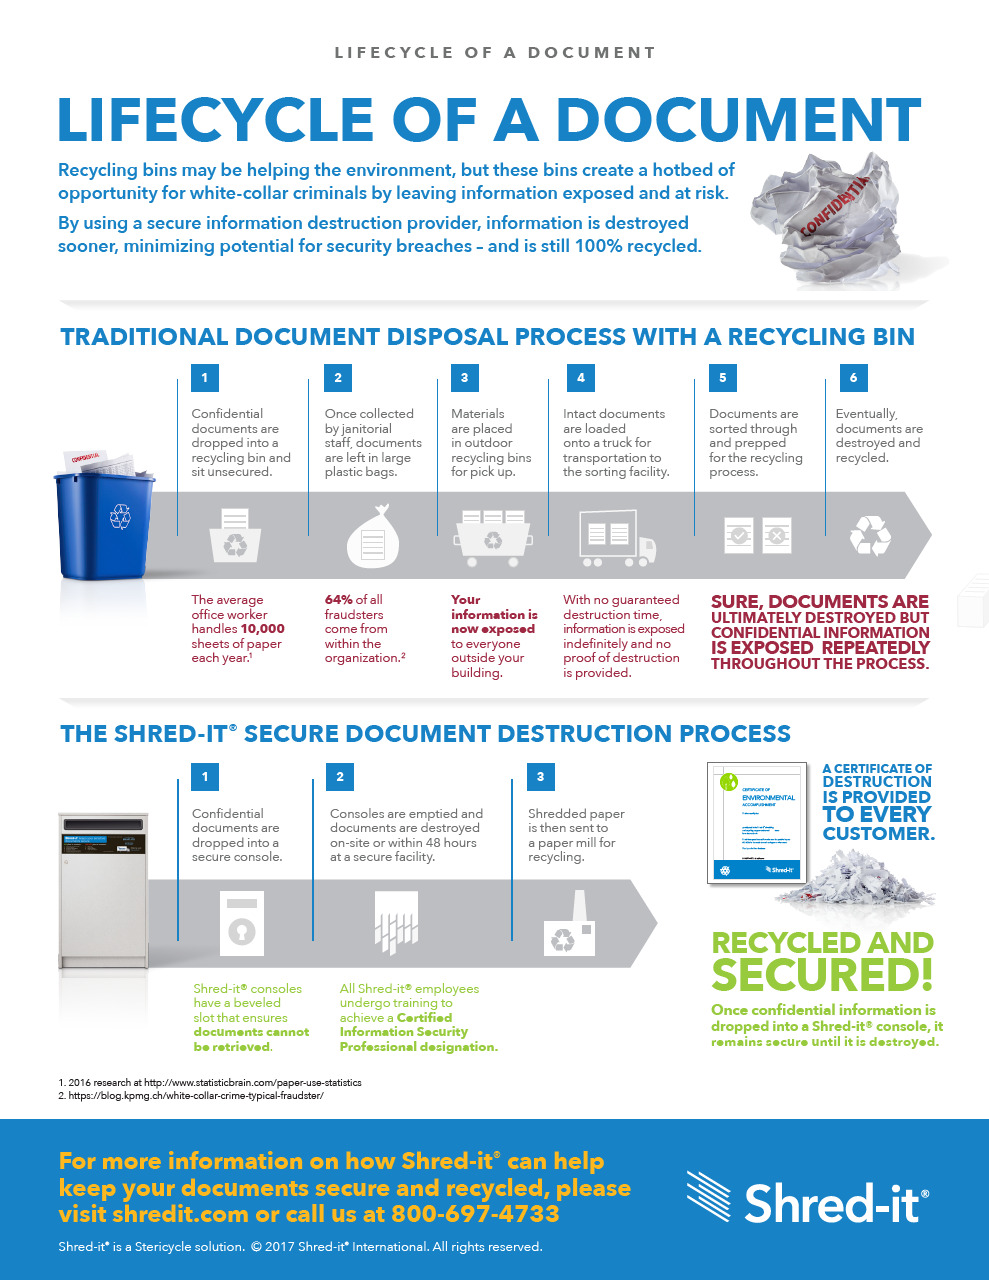 Shred-it-Lifecycle-of-a-Document.pdf